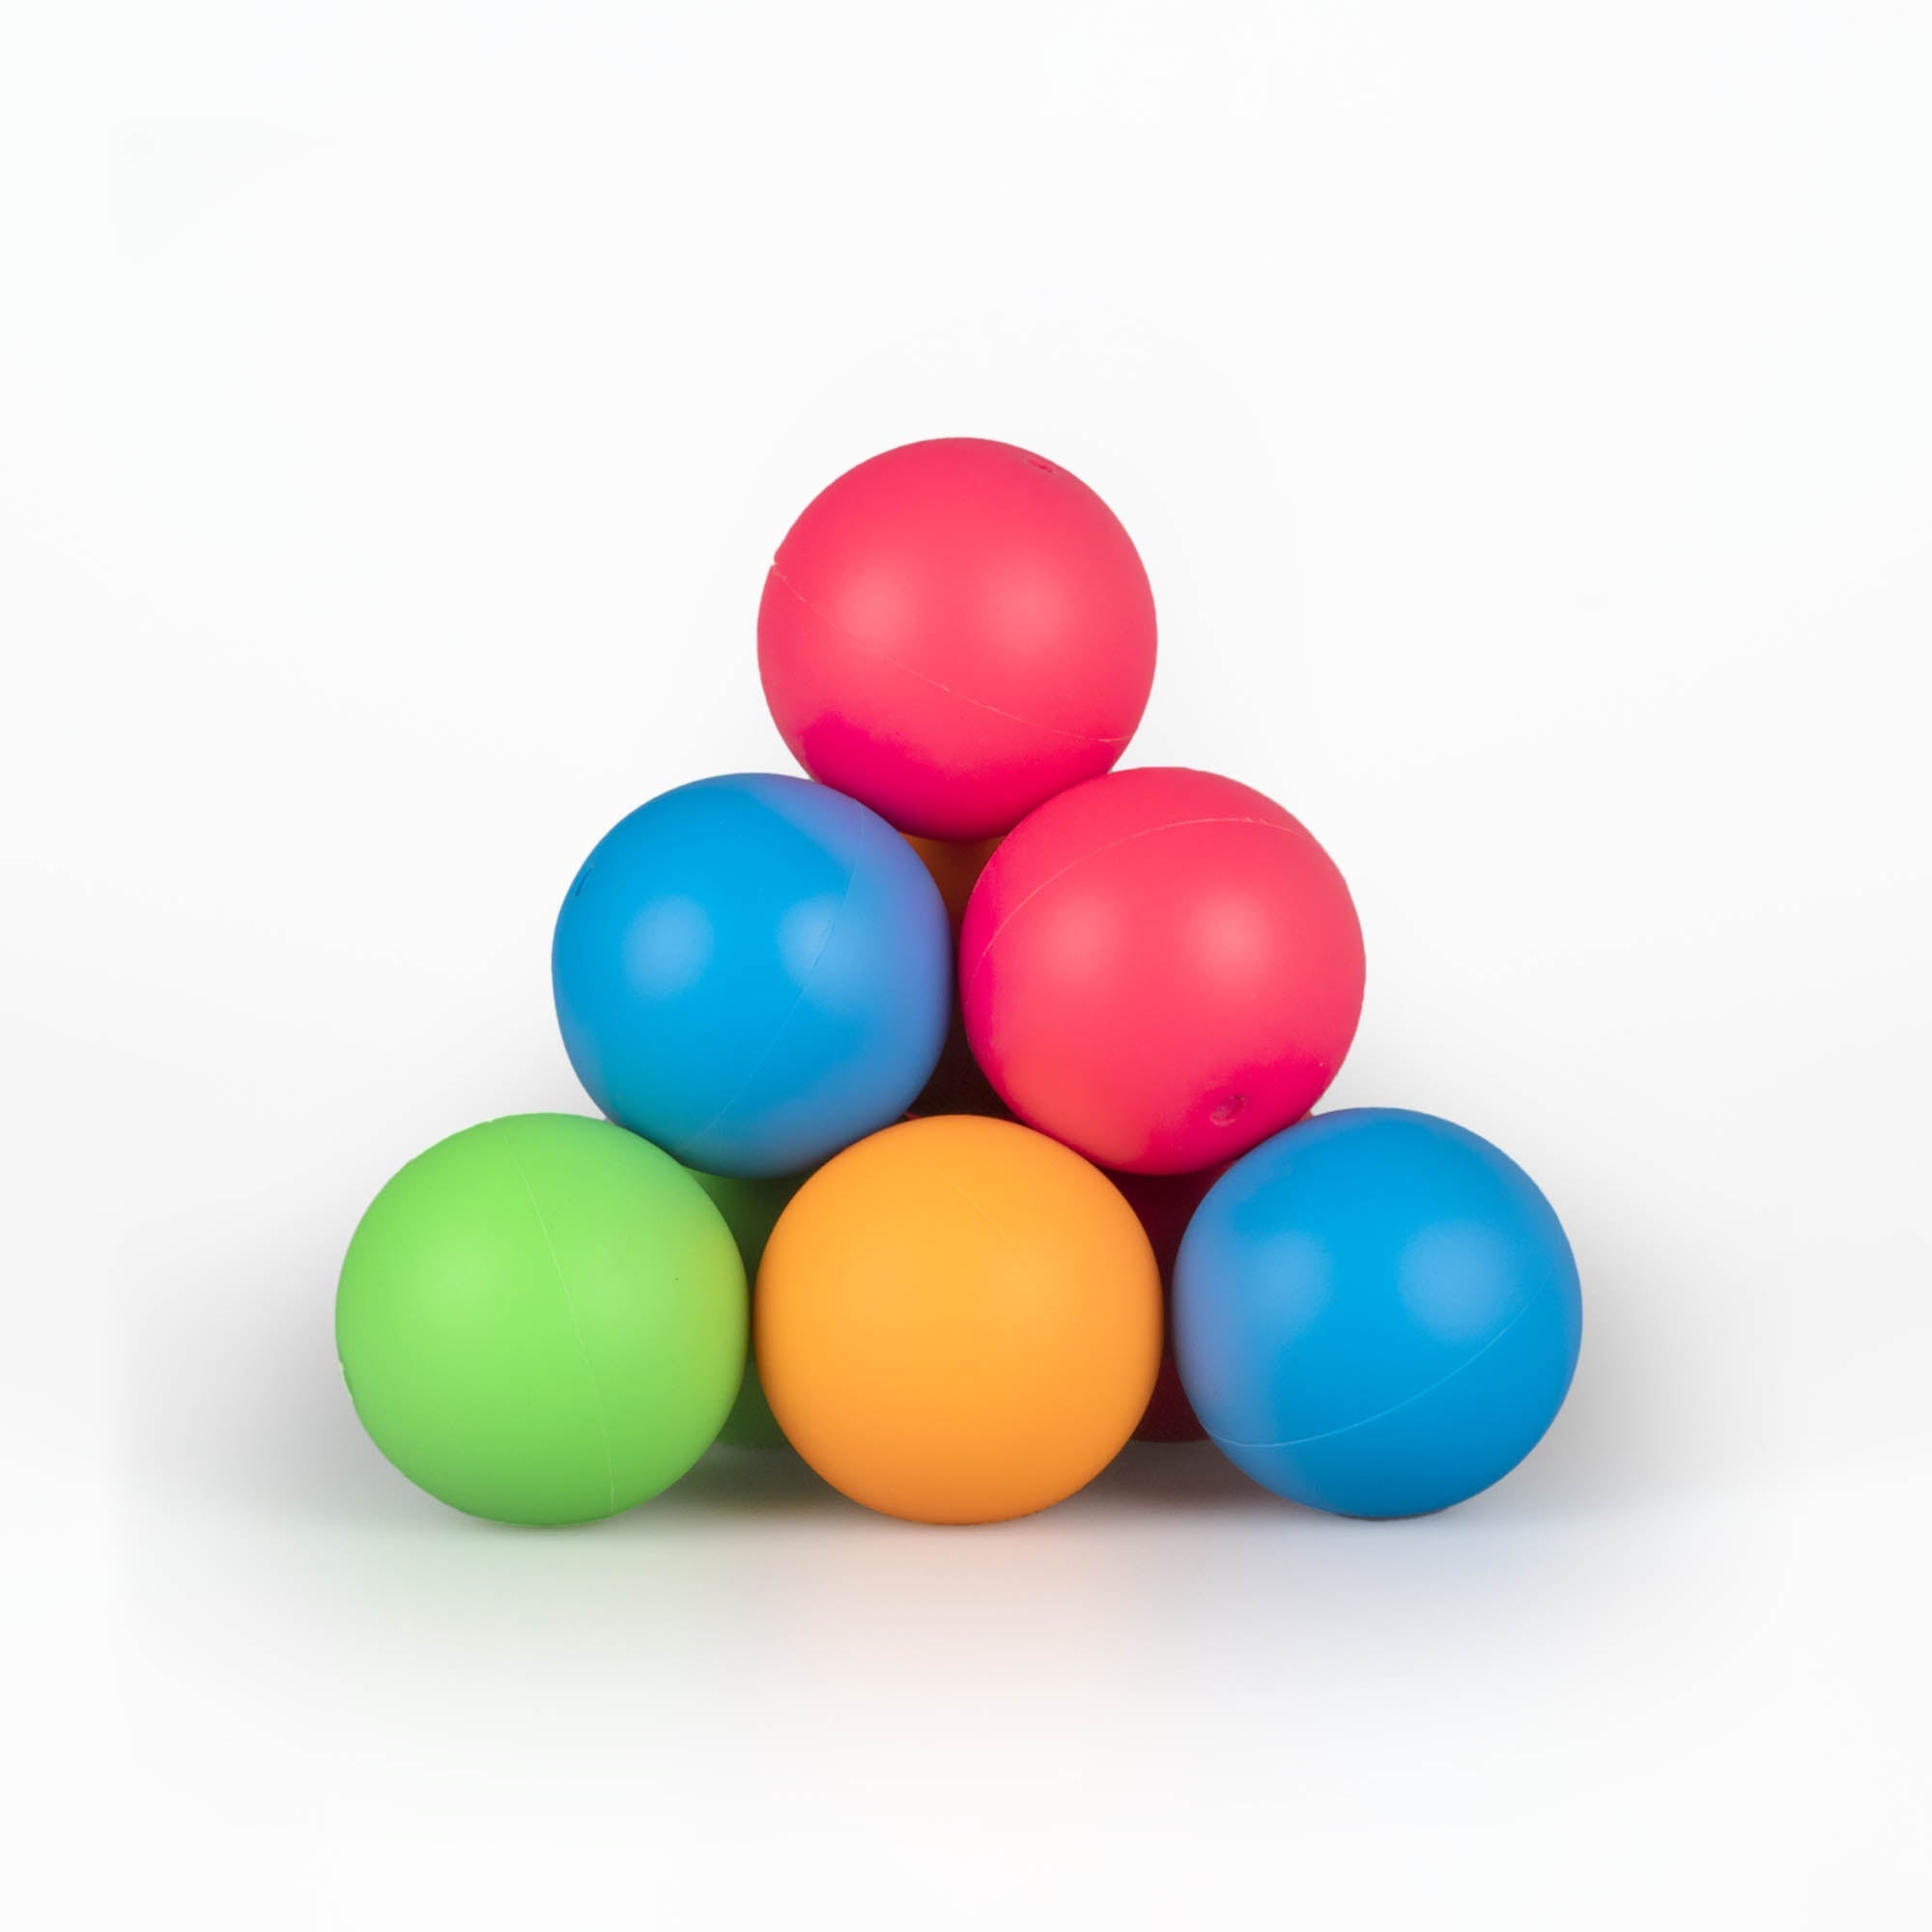 MMX 62mm Juggling balls, all colours in stacked group shot